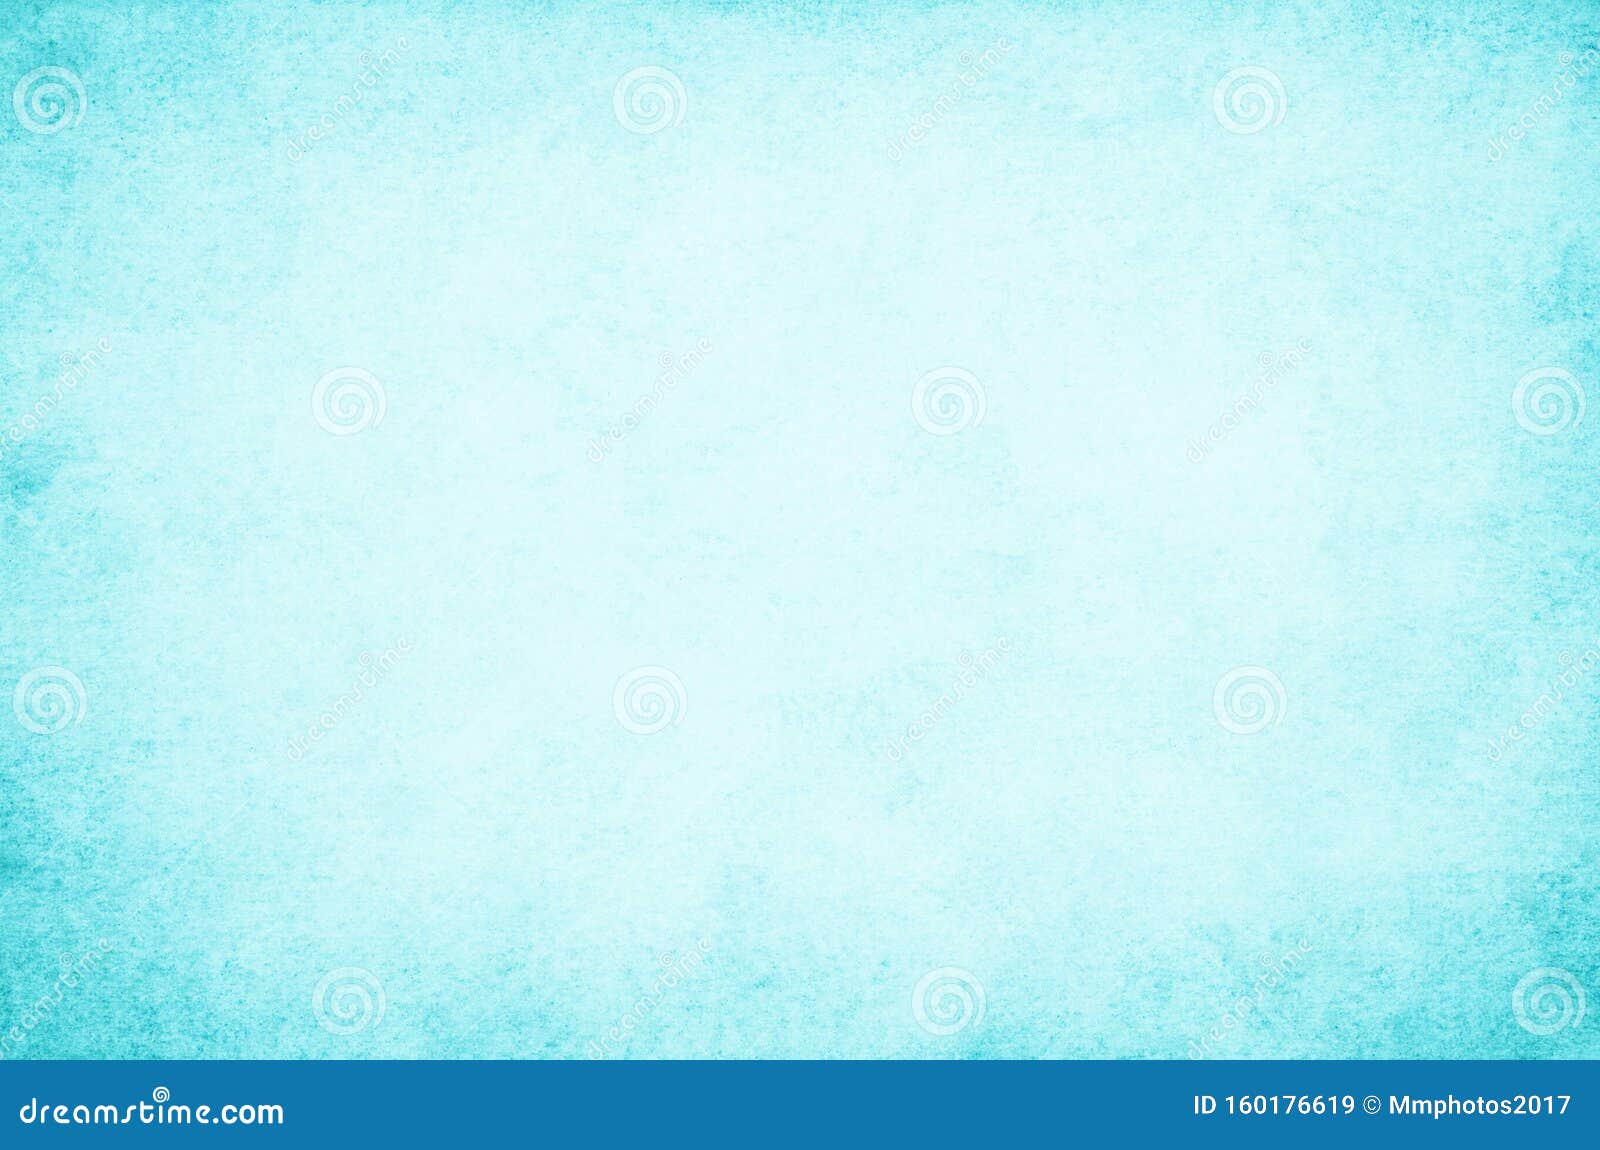 sky blue paper texture 3623622 Stock Photo at Vecteezy